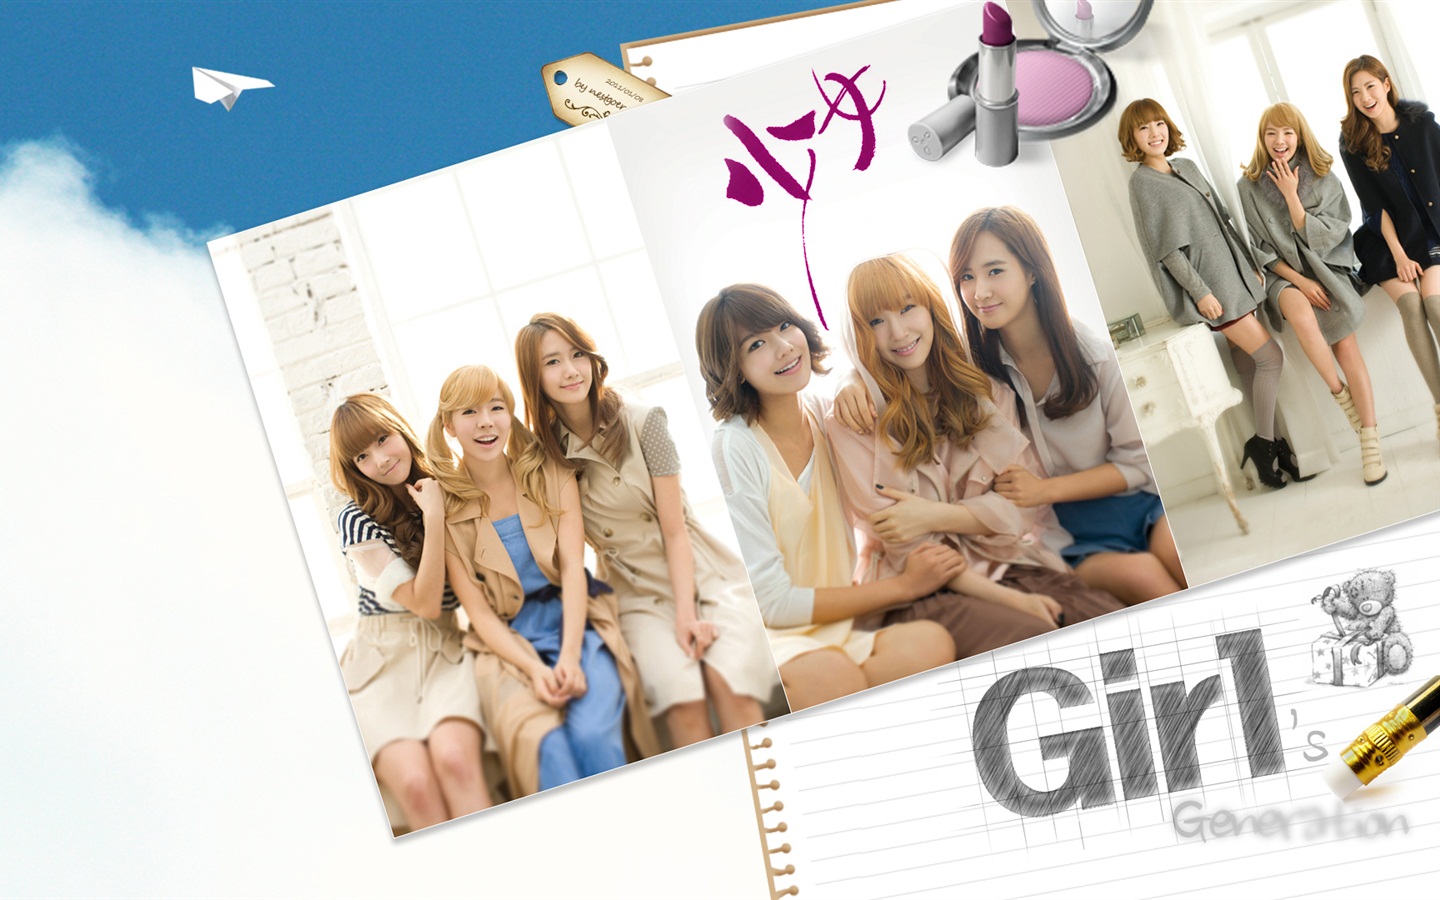 Girls Generation latest HD wallpapers collection #11 - 1440x900